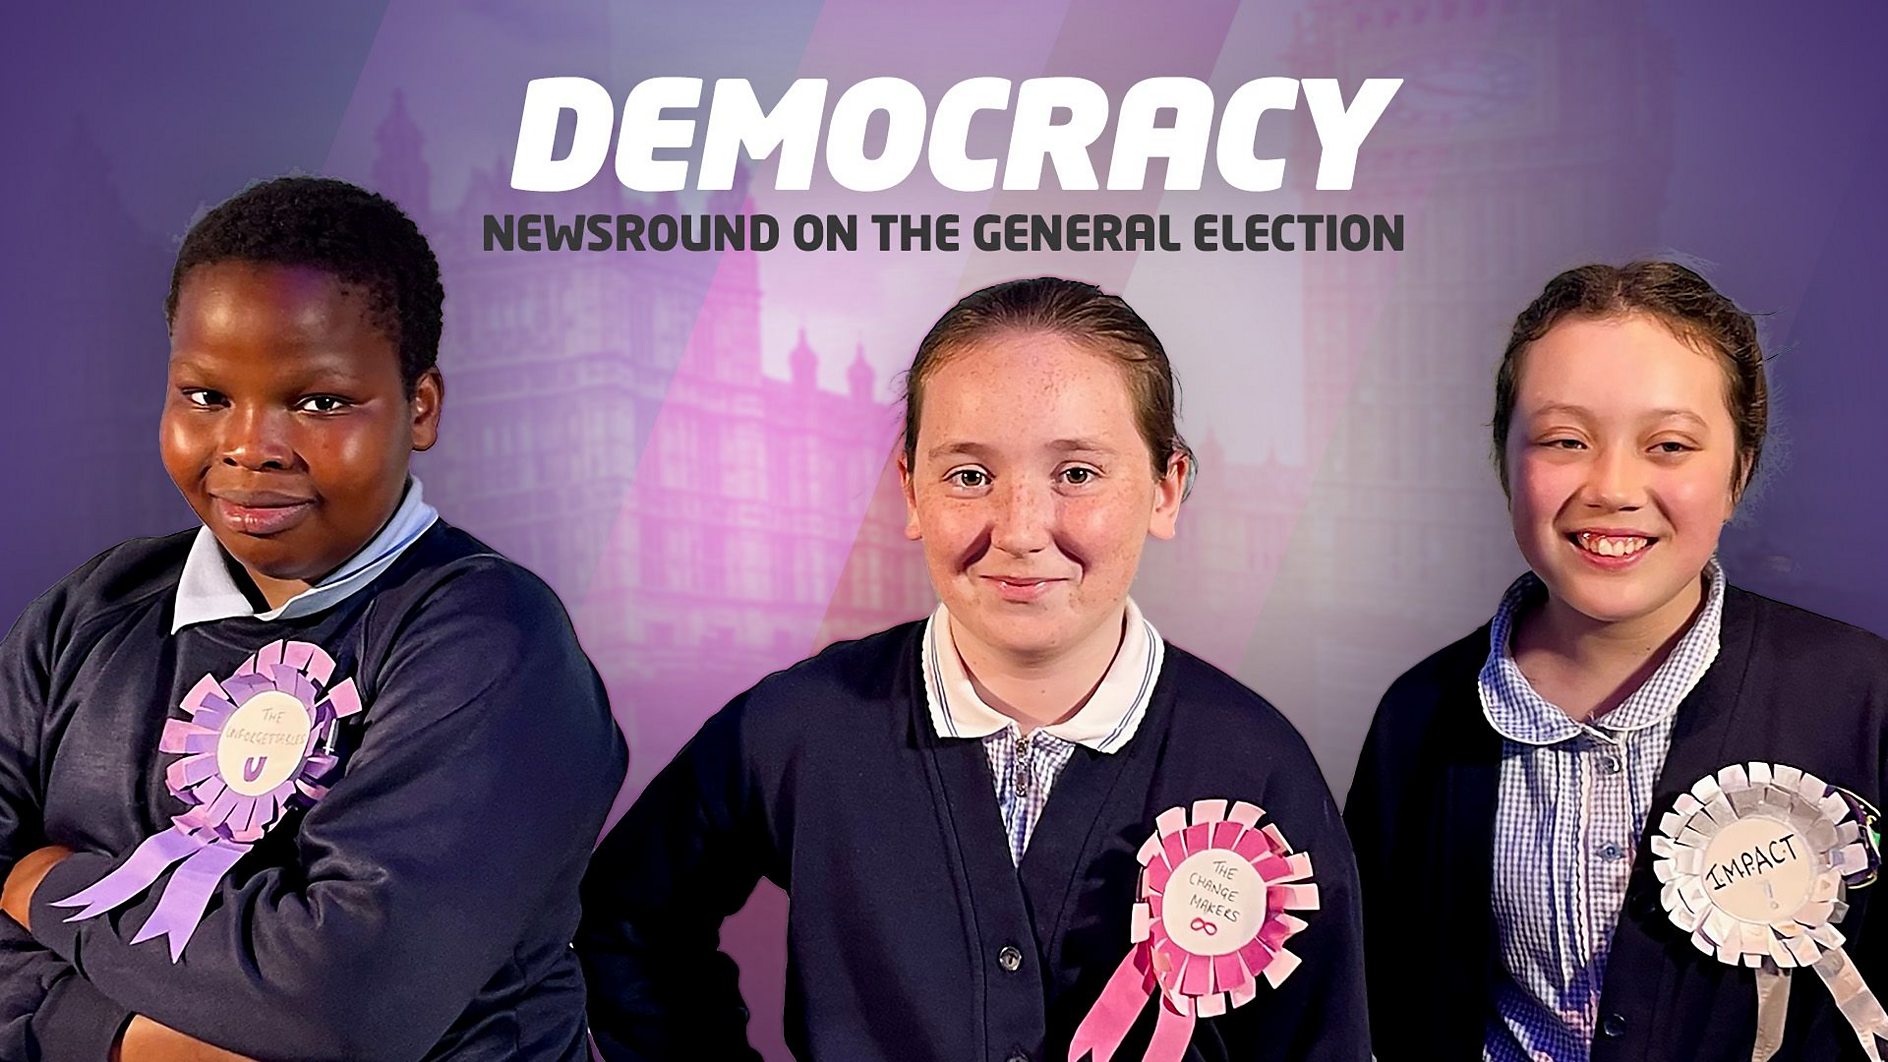 BBC Children's news programme, Newsround, discusses democracy ahead of this week's General Election